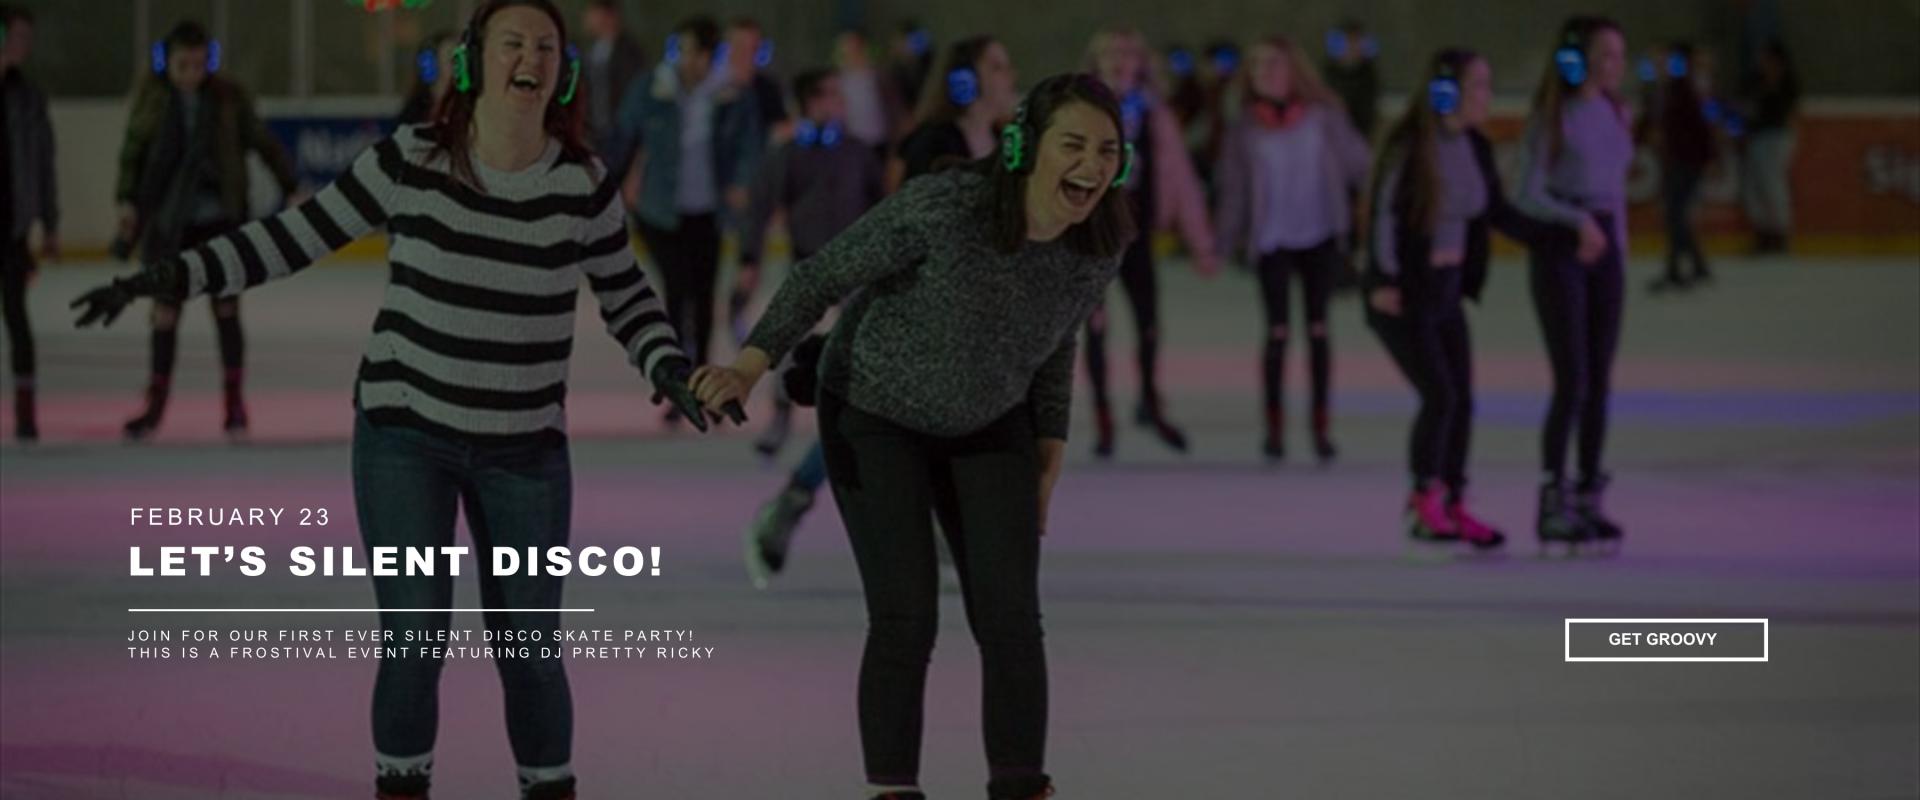 this graphic shows people skating with headphones on with a button to learn more